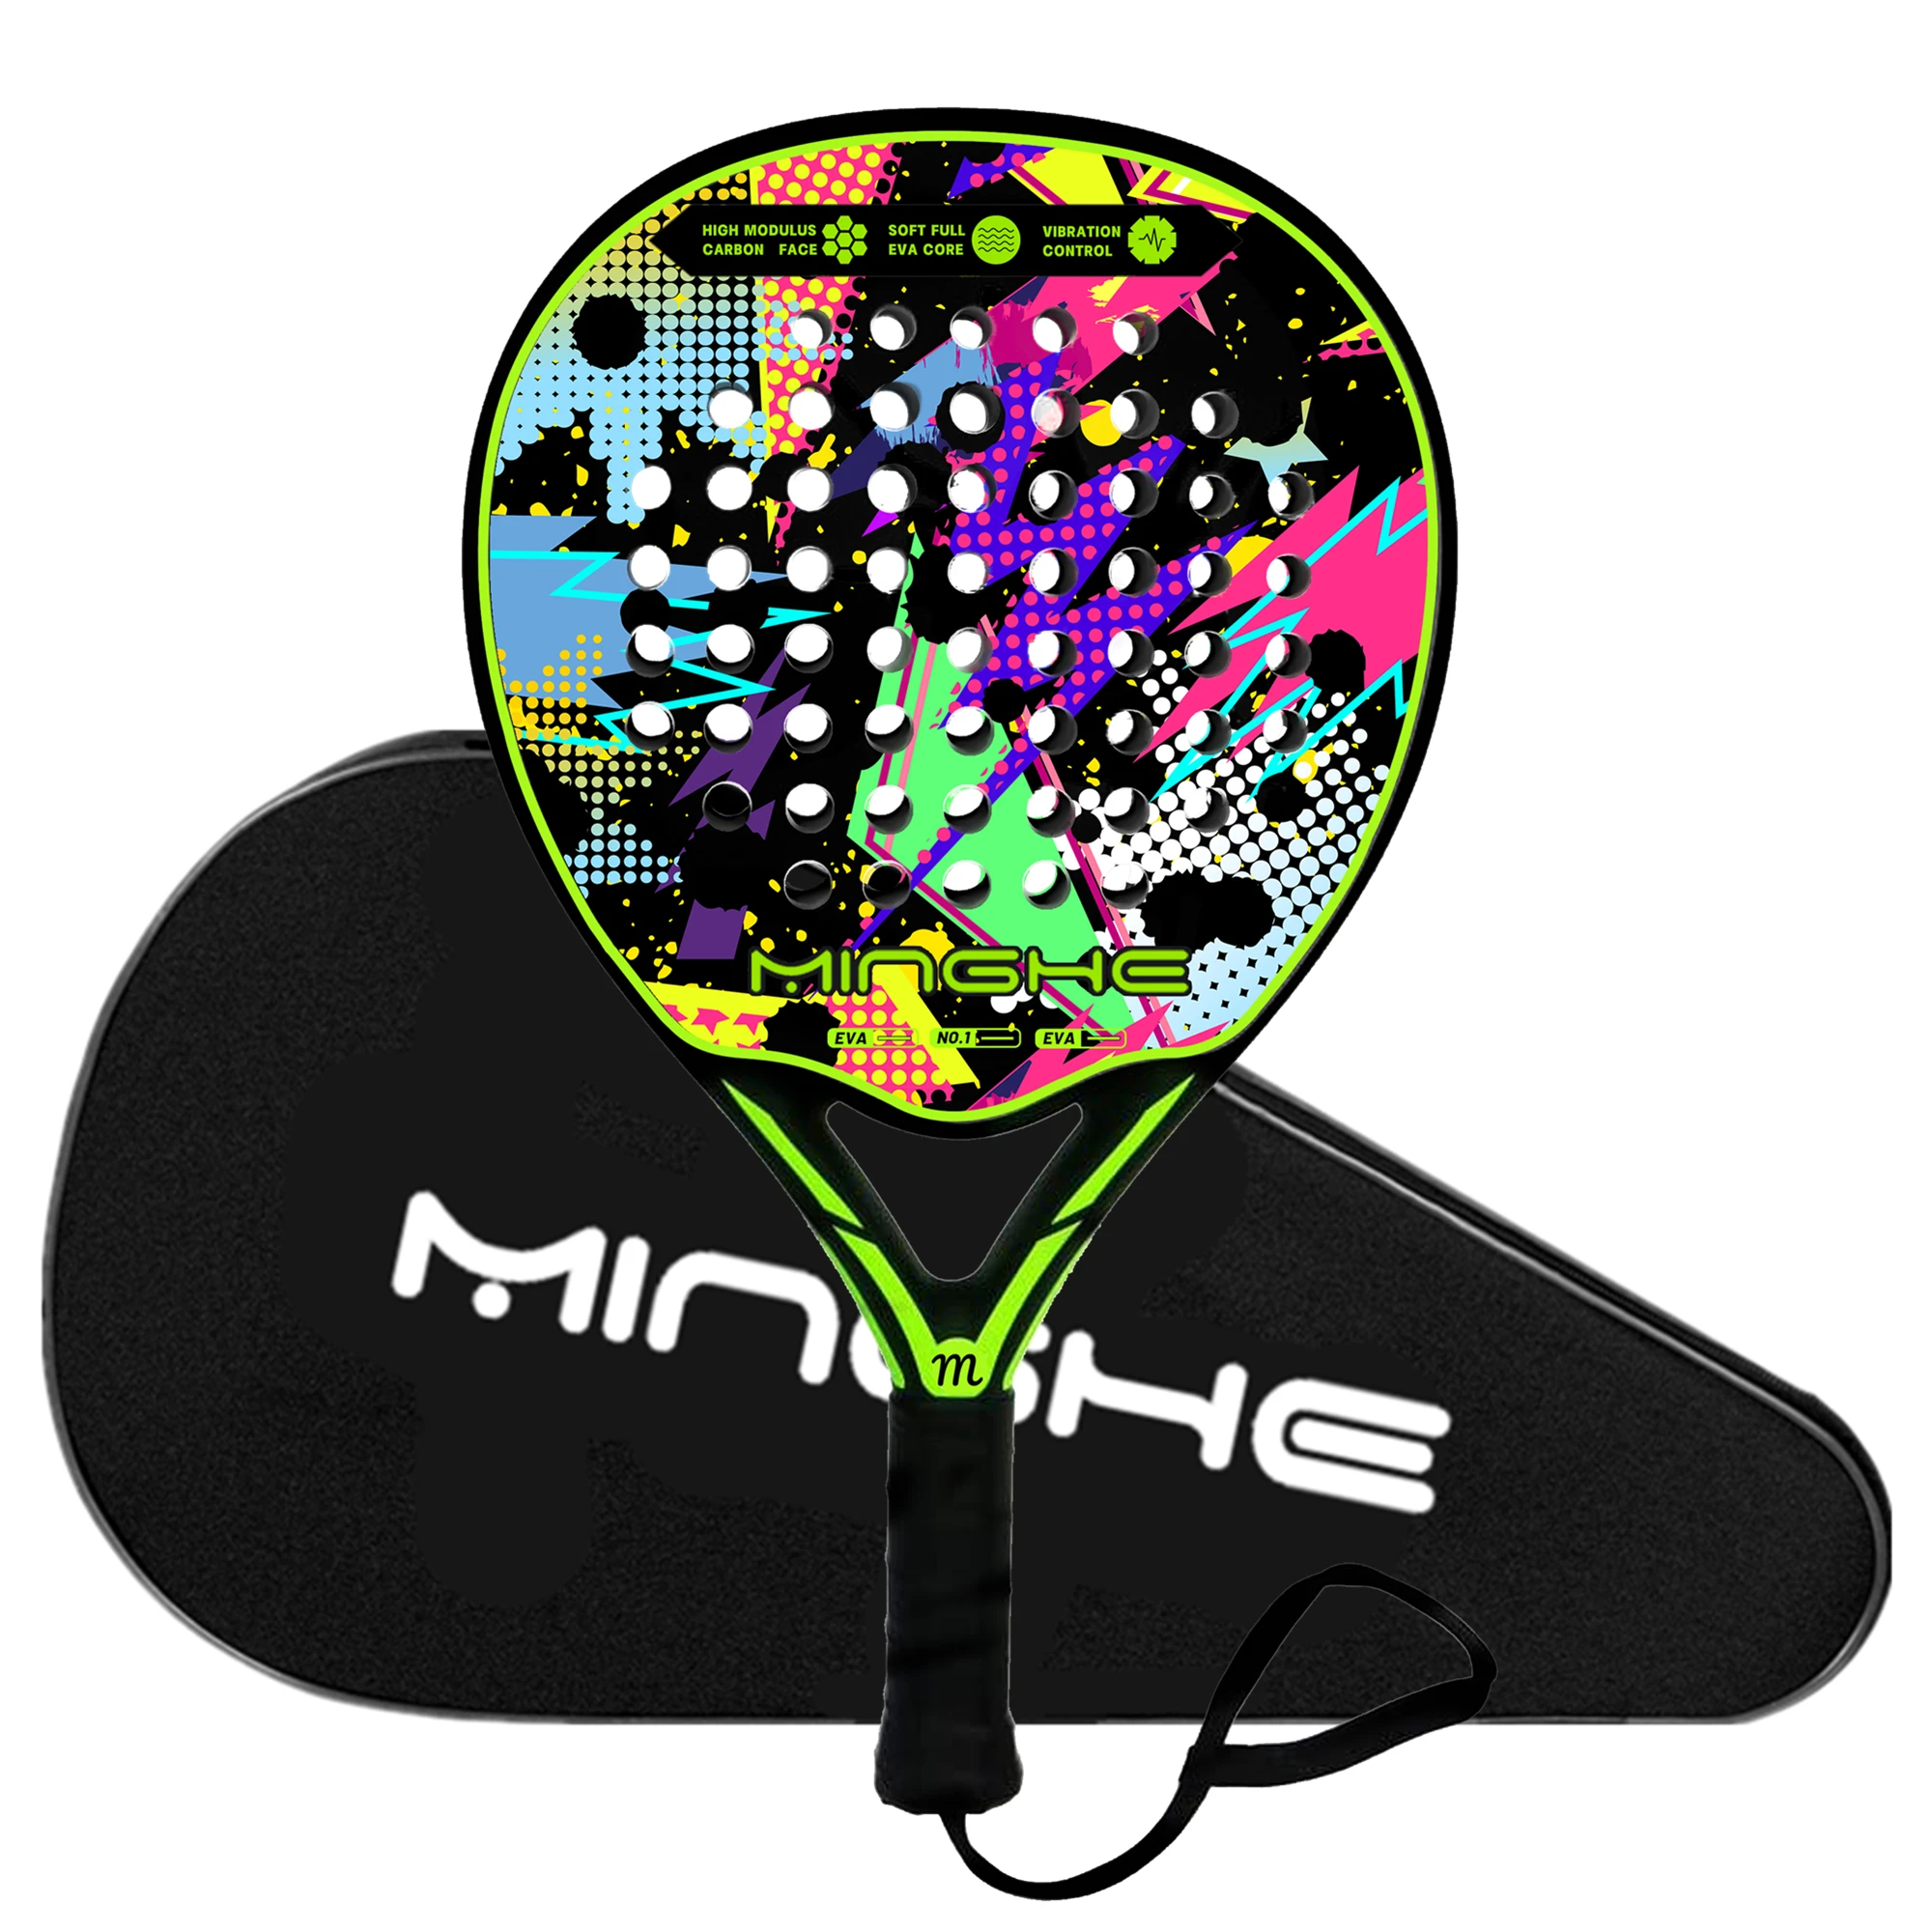 MINGHE color graffiti series carbon fiber racket thickness 38mm tennis racket, specially designed for beginners